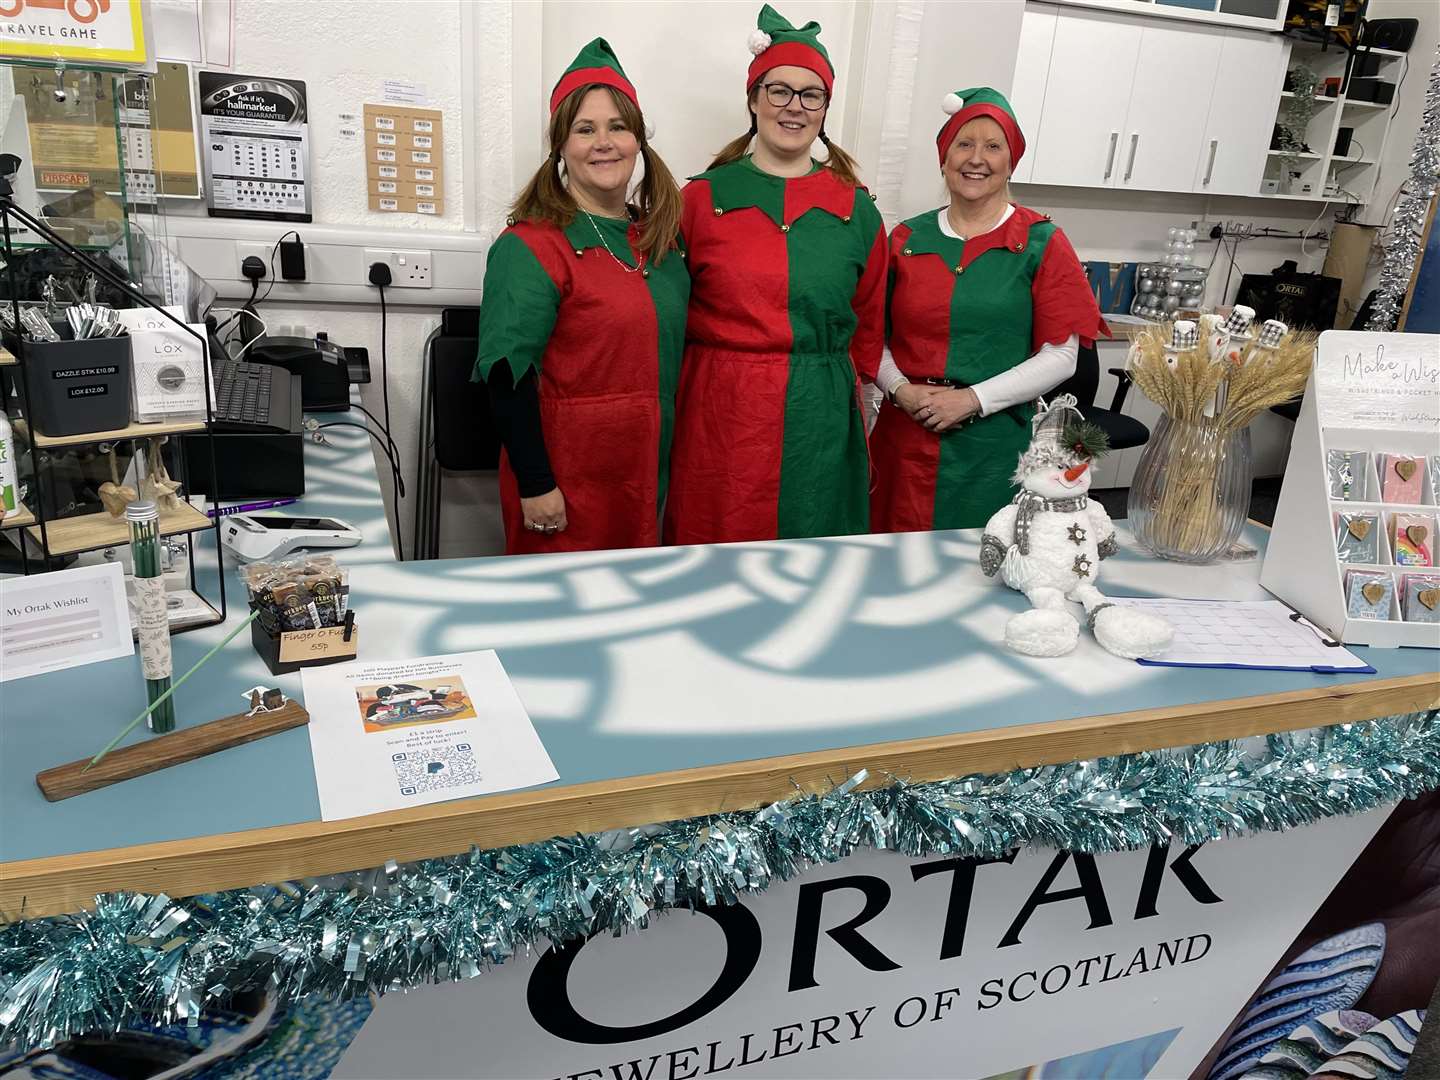 Staff from Ortak got into the festive spirit at the Christmas Fun Day which was held at John O’ Goats on Sunday.